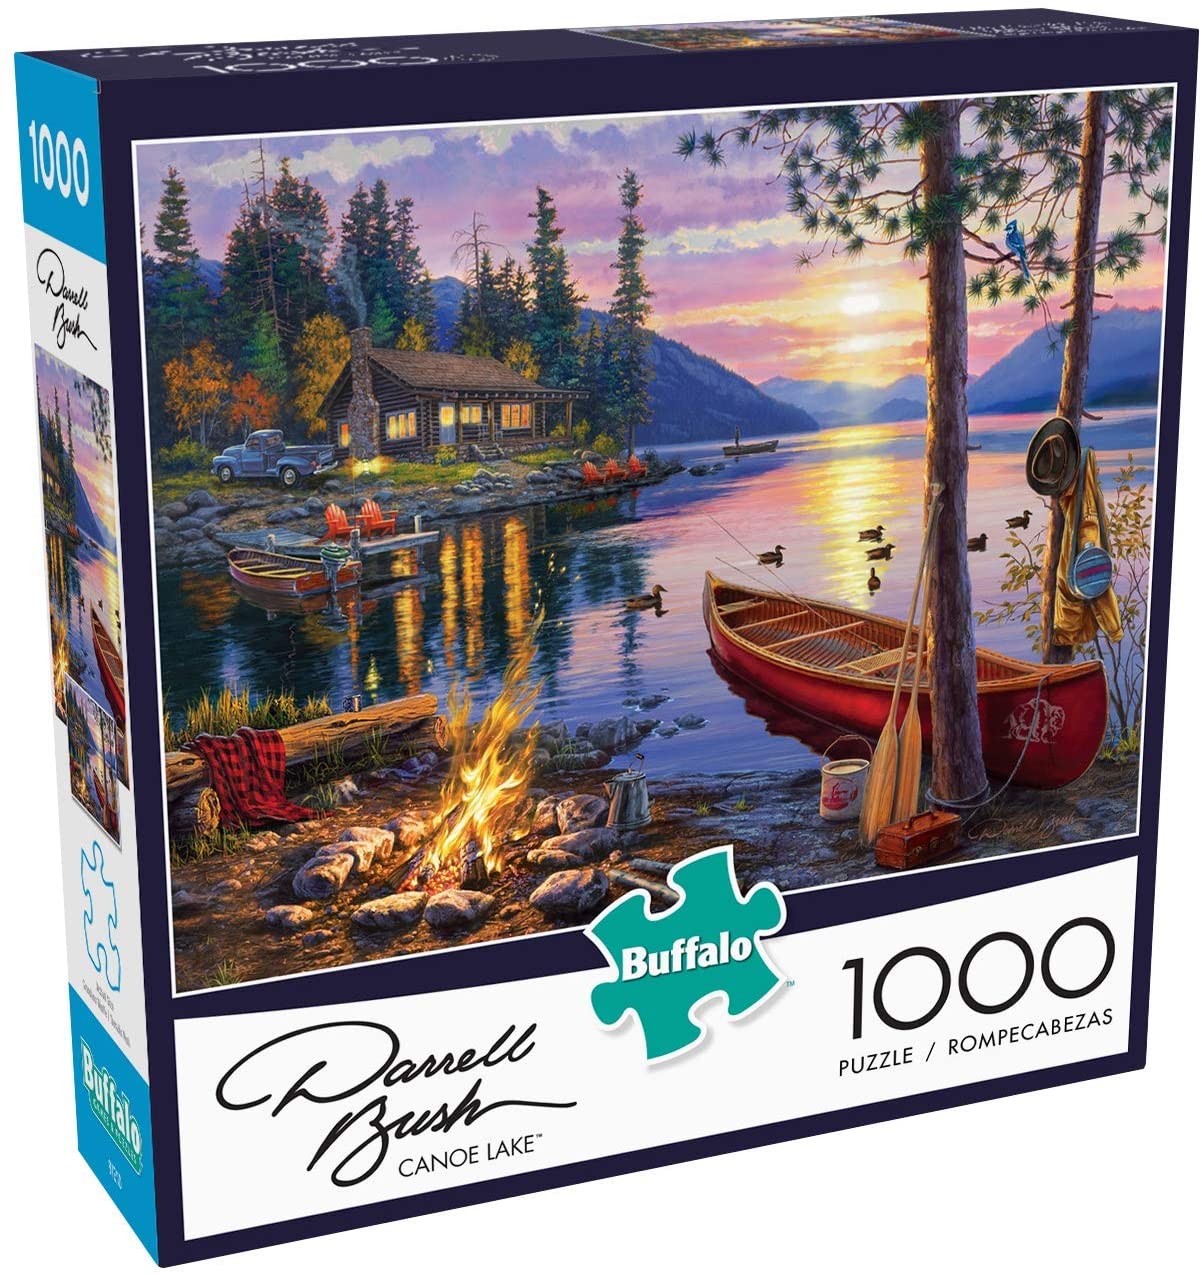 1,000-Piece Buffalo Games Jigsaw Puzzles: Canoe Lake, Twas' The Night Before Christmas $9.97 each & More